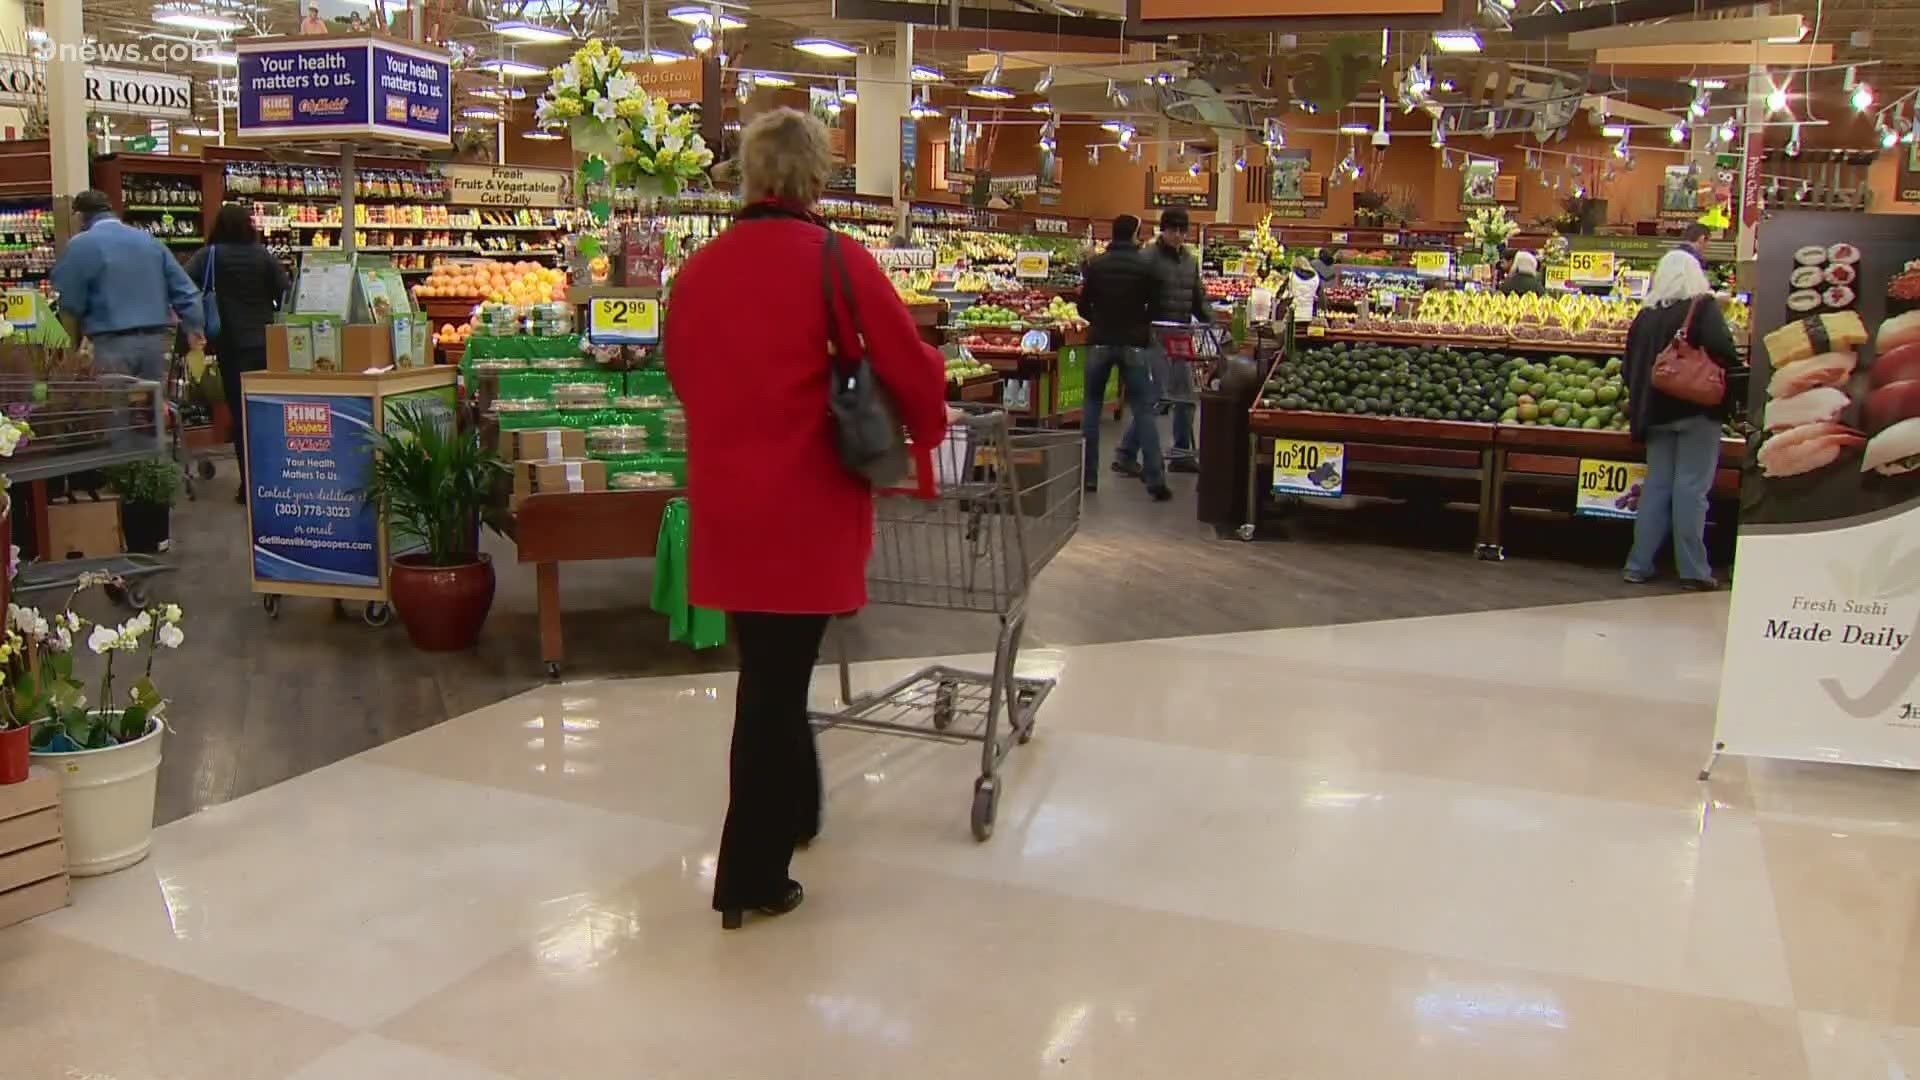 A King Soopers executive said the panic-buying and food shortages are beginning to level off.